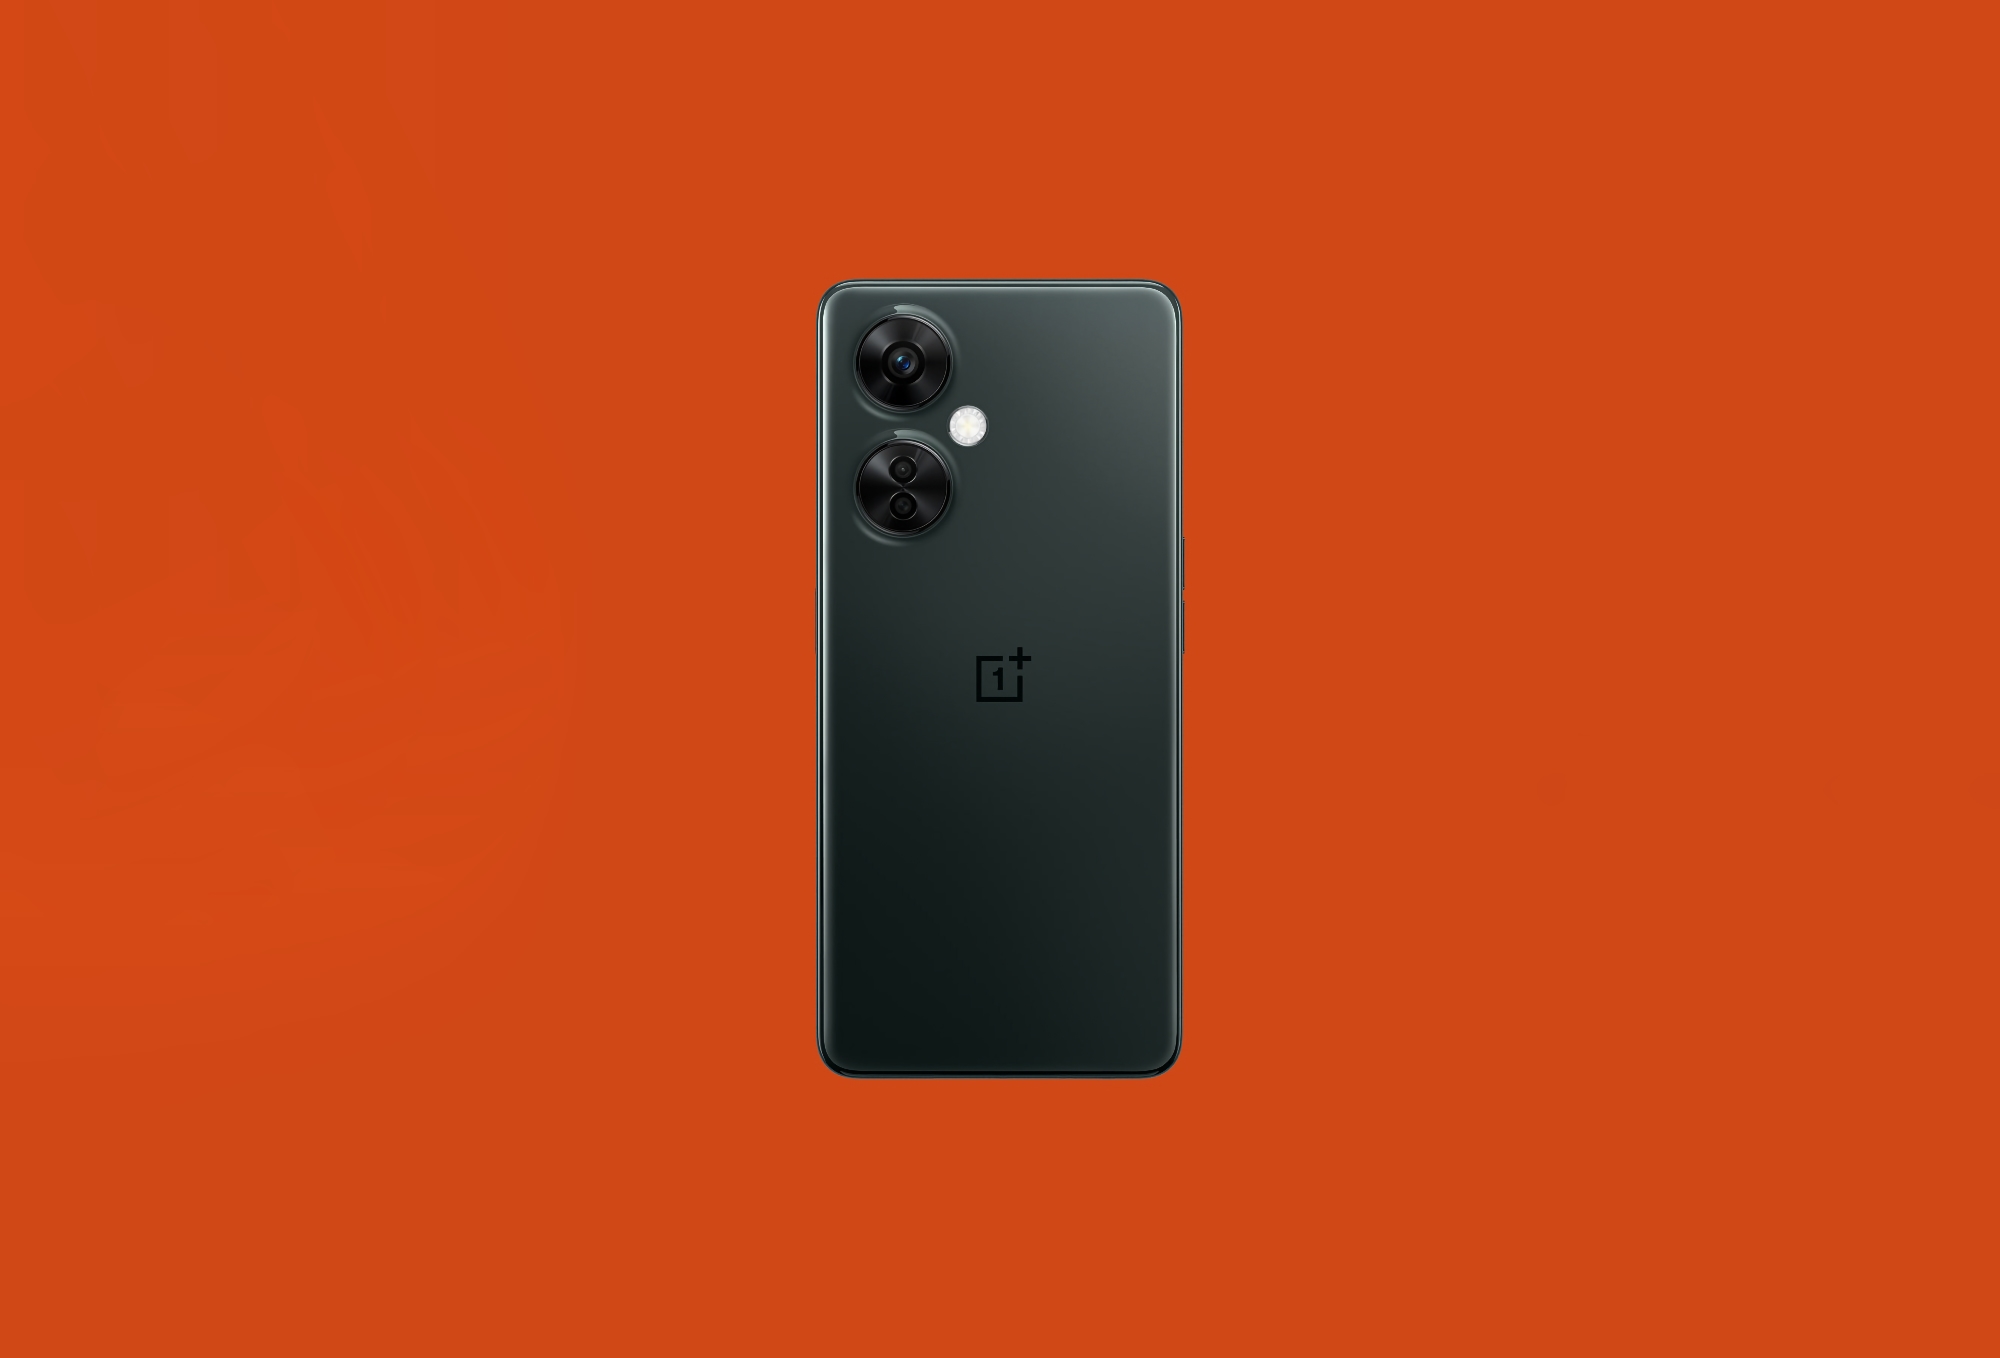 $50 off: OnePlus has dropped the price of the Nord N30 5G smartphone with 120Hz screen, 108 MP camera and 5000 mAh battery